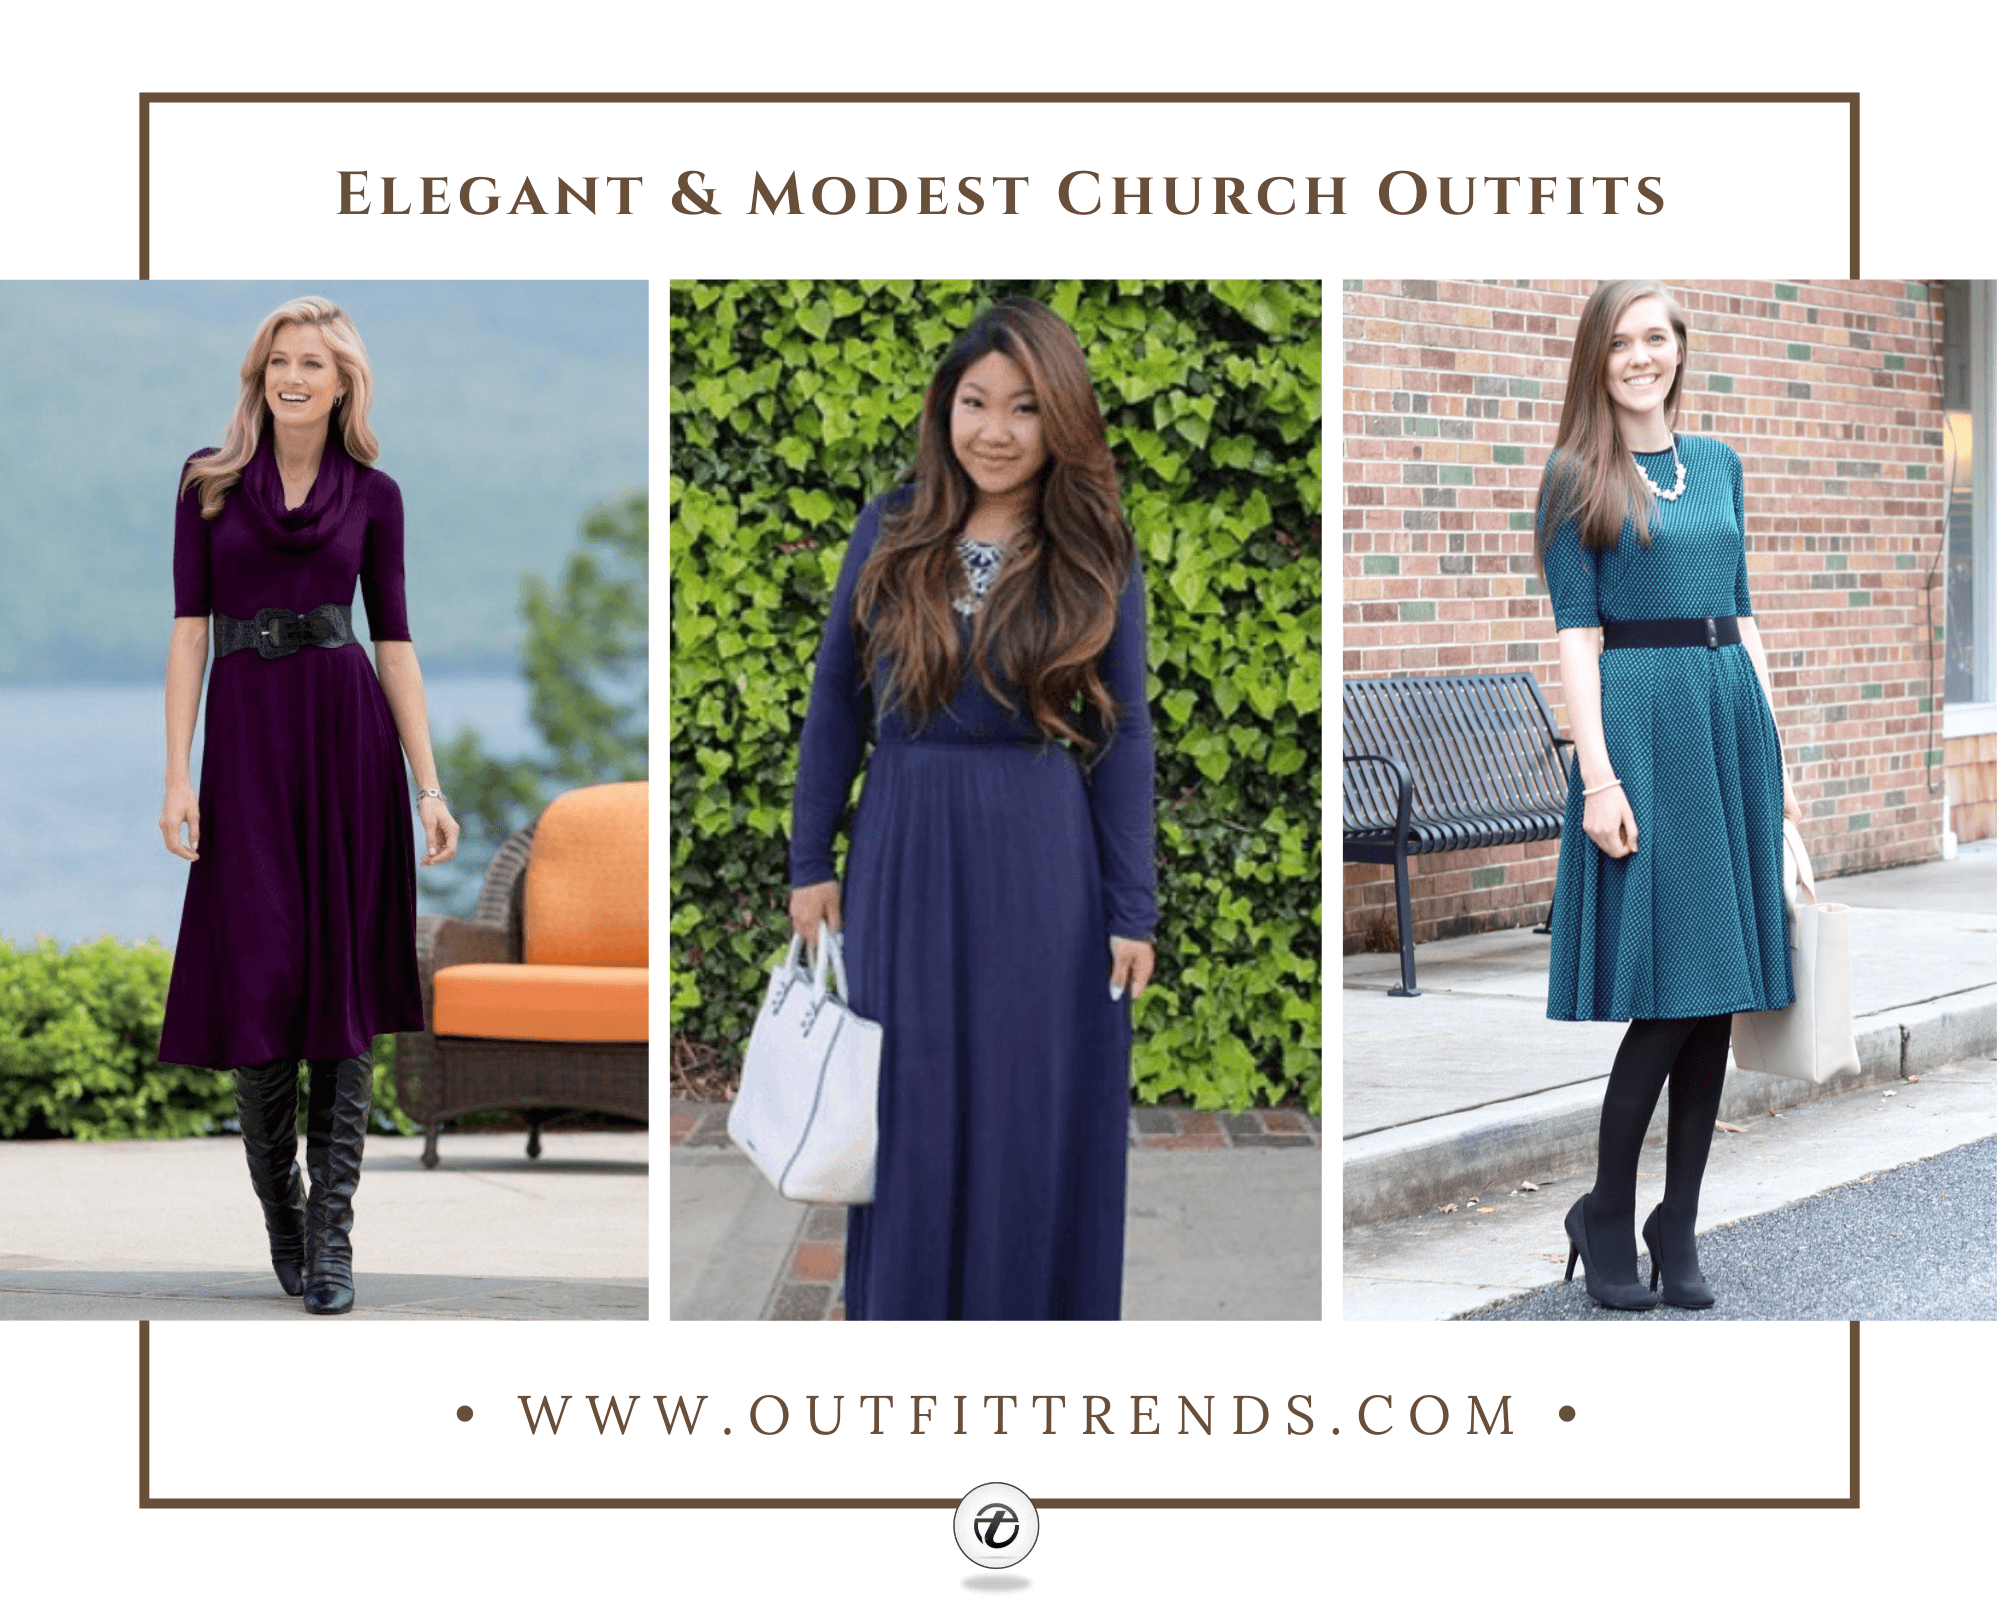 Church Outfit Ideas | 30 Ideas on What to Wear to Church